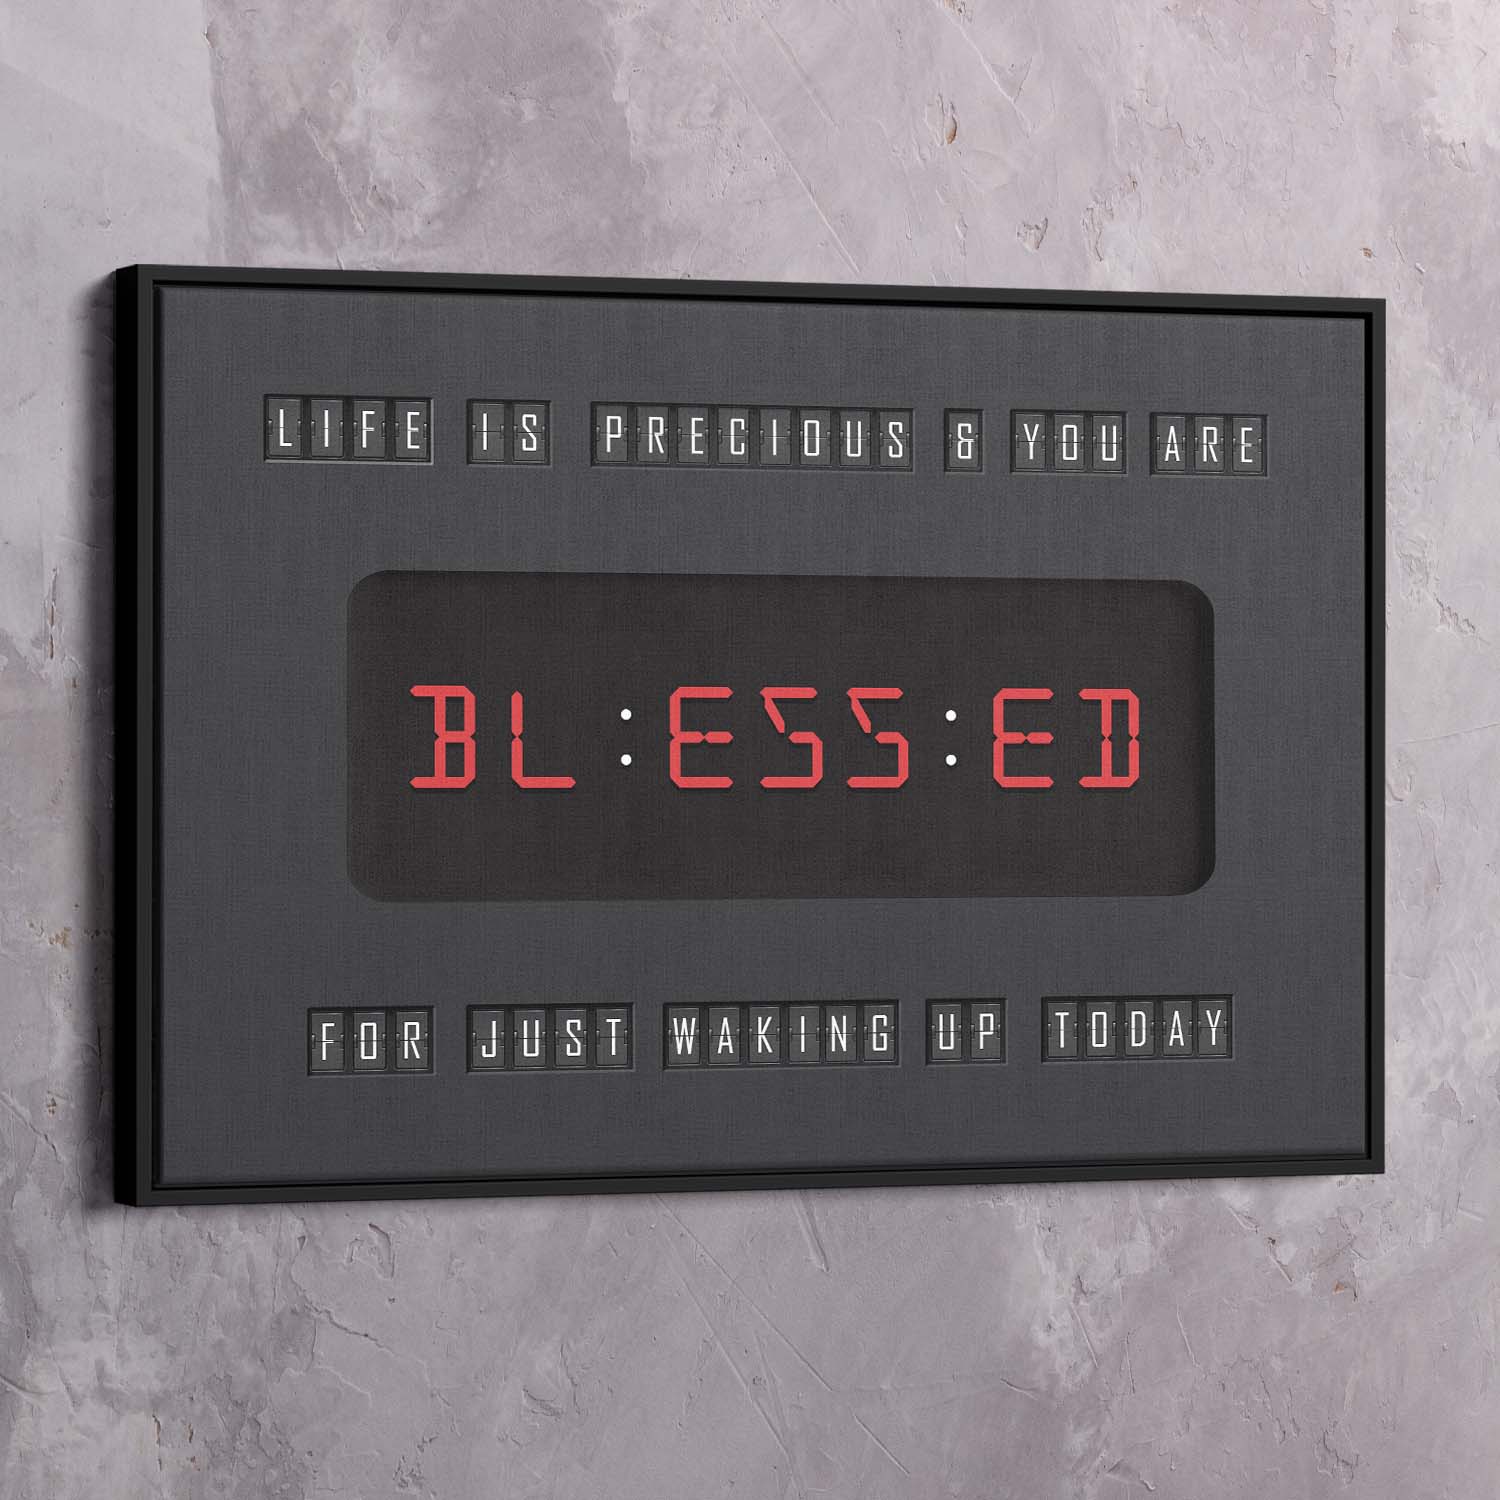 Blessed for Waking Up Today Clock Wall Art | Inspirational Wall Art Motivational Wall Art Quotes Office Art | ImpaktMaker Exclusive Canvas Art Landscape